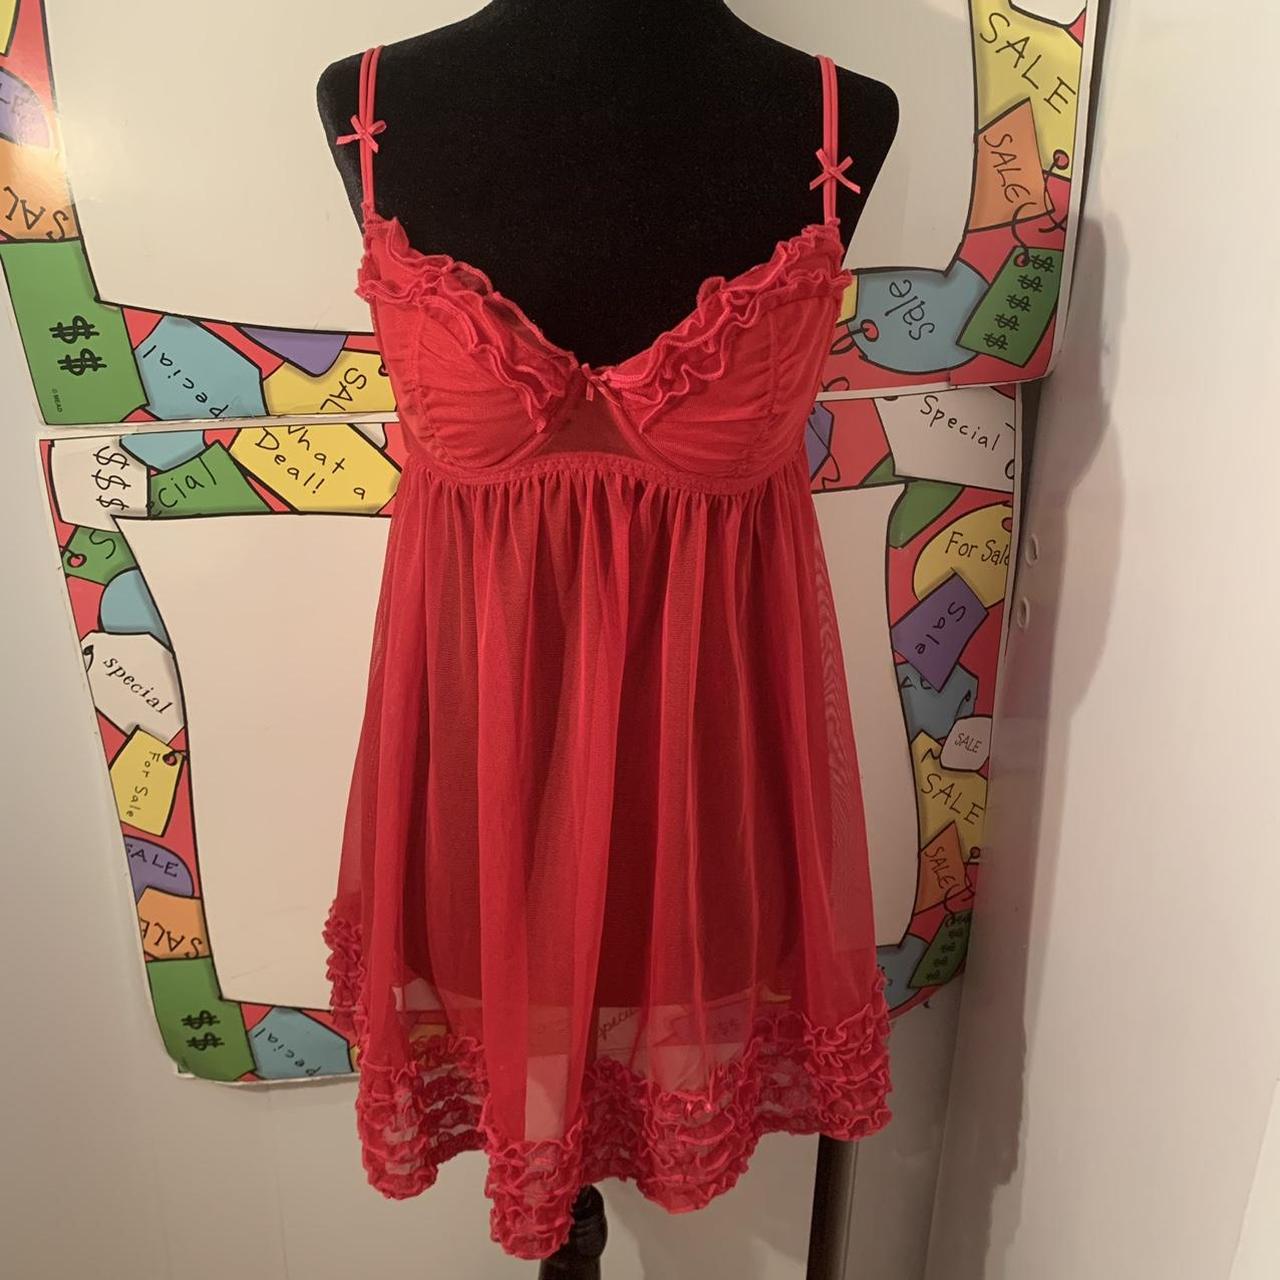 Product Image 1 - Ann Summers Red Babydoll Top
size: